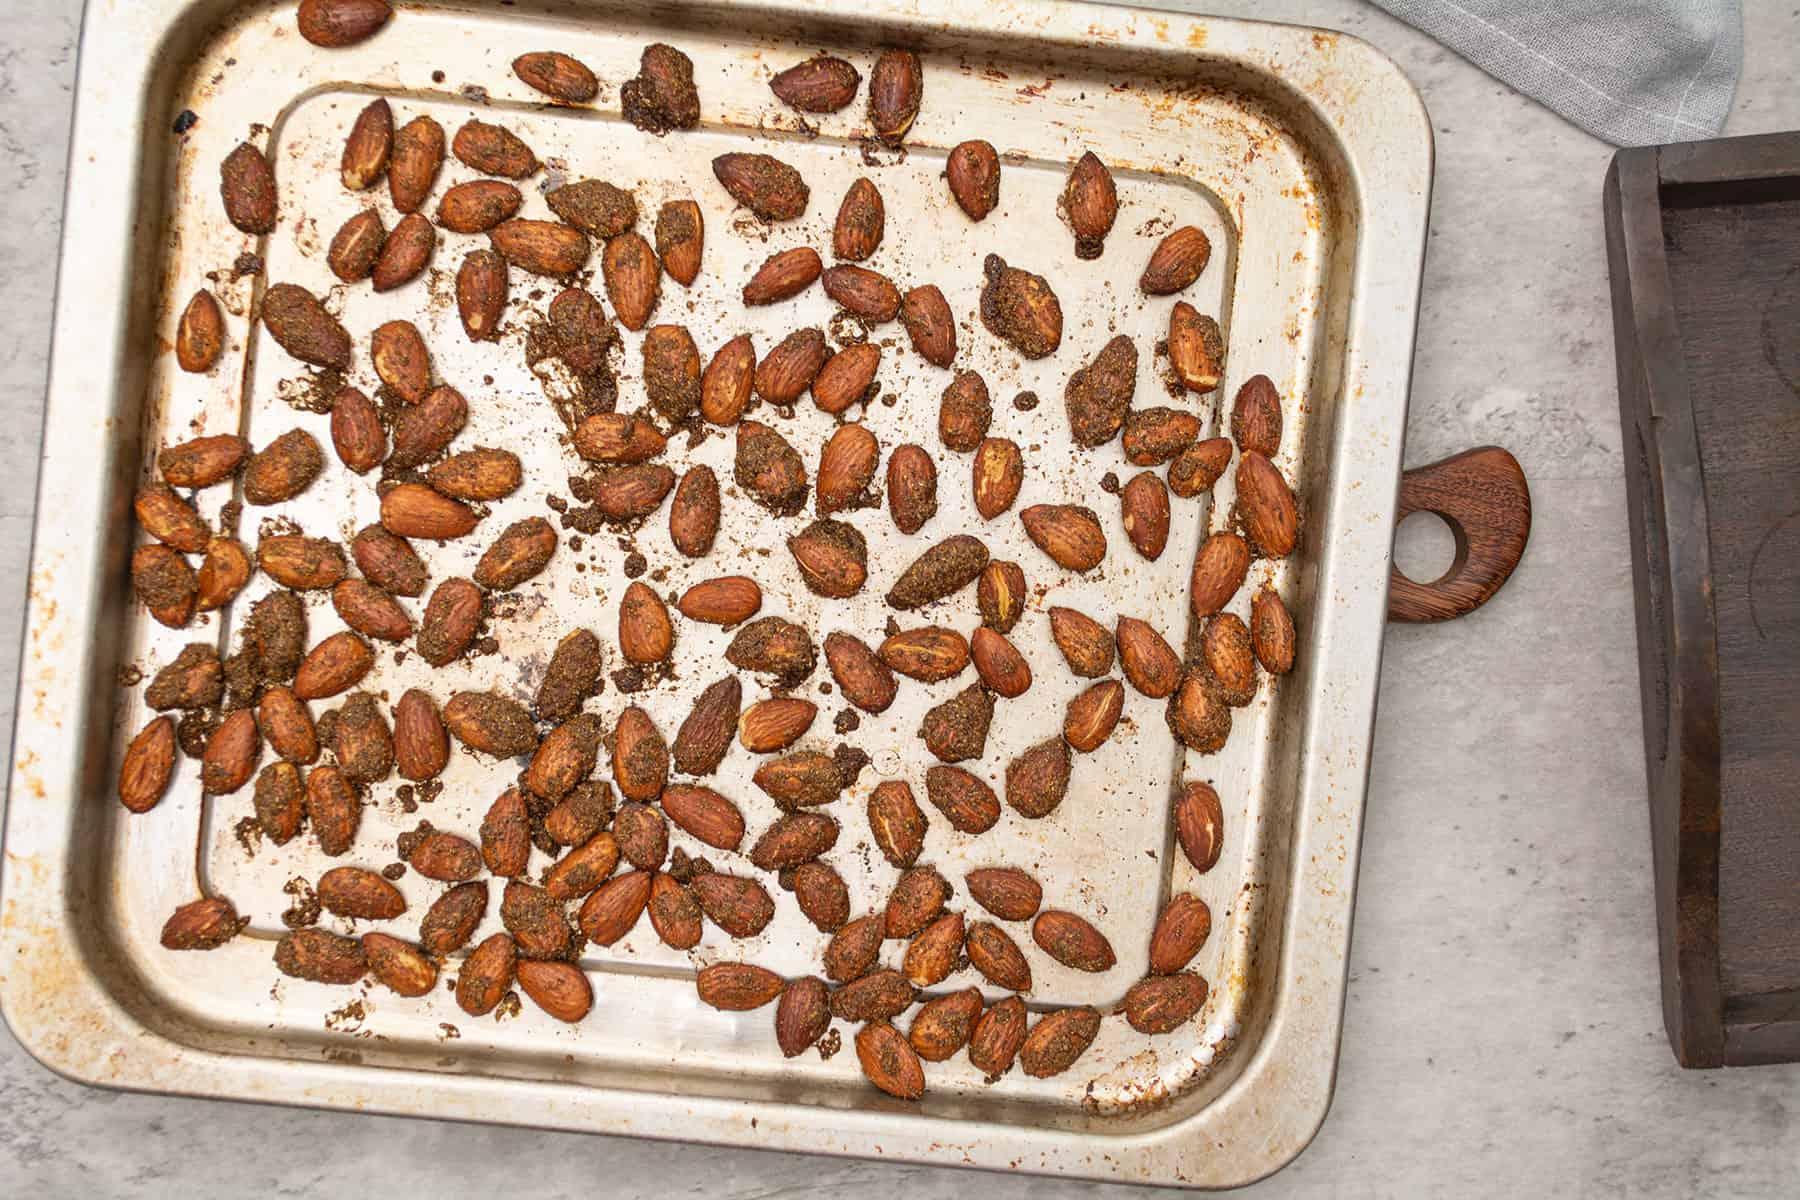 how to make curried almond step-baked almonds in a tray